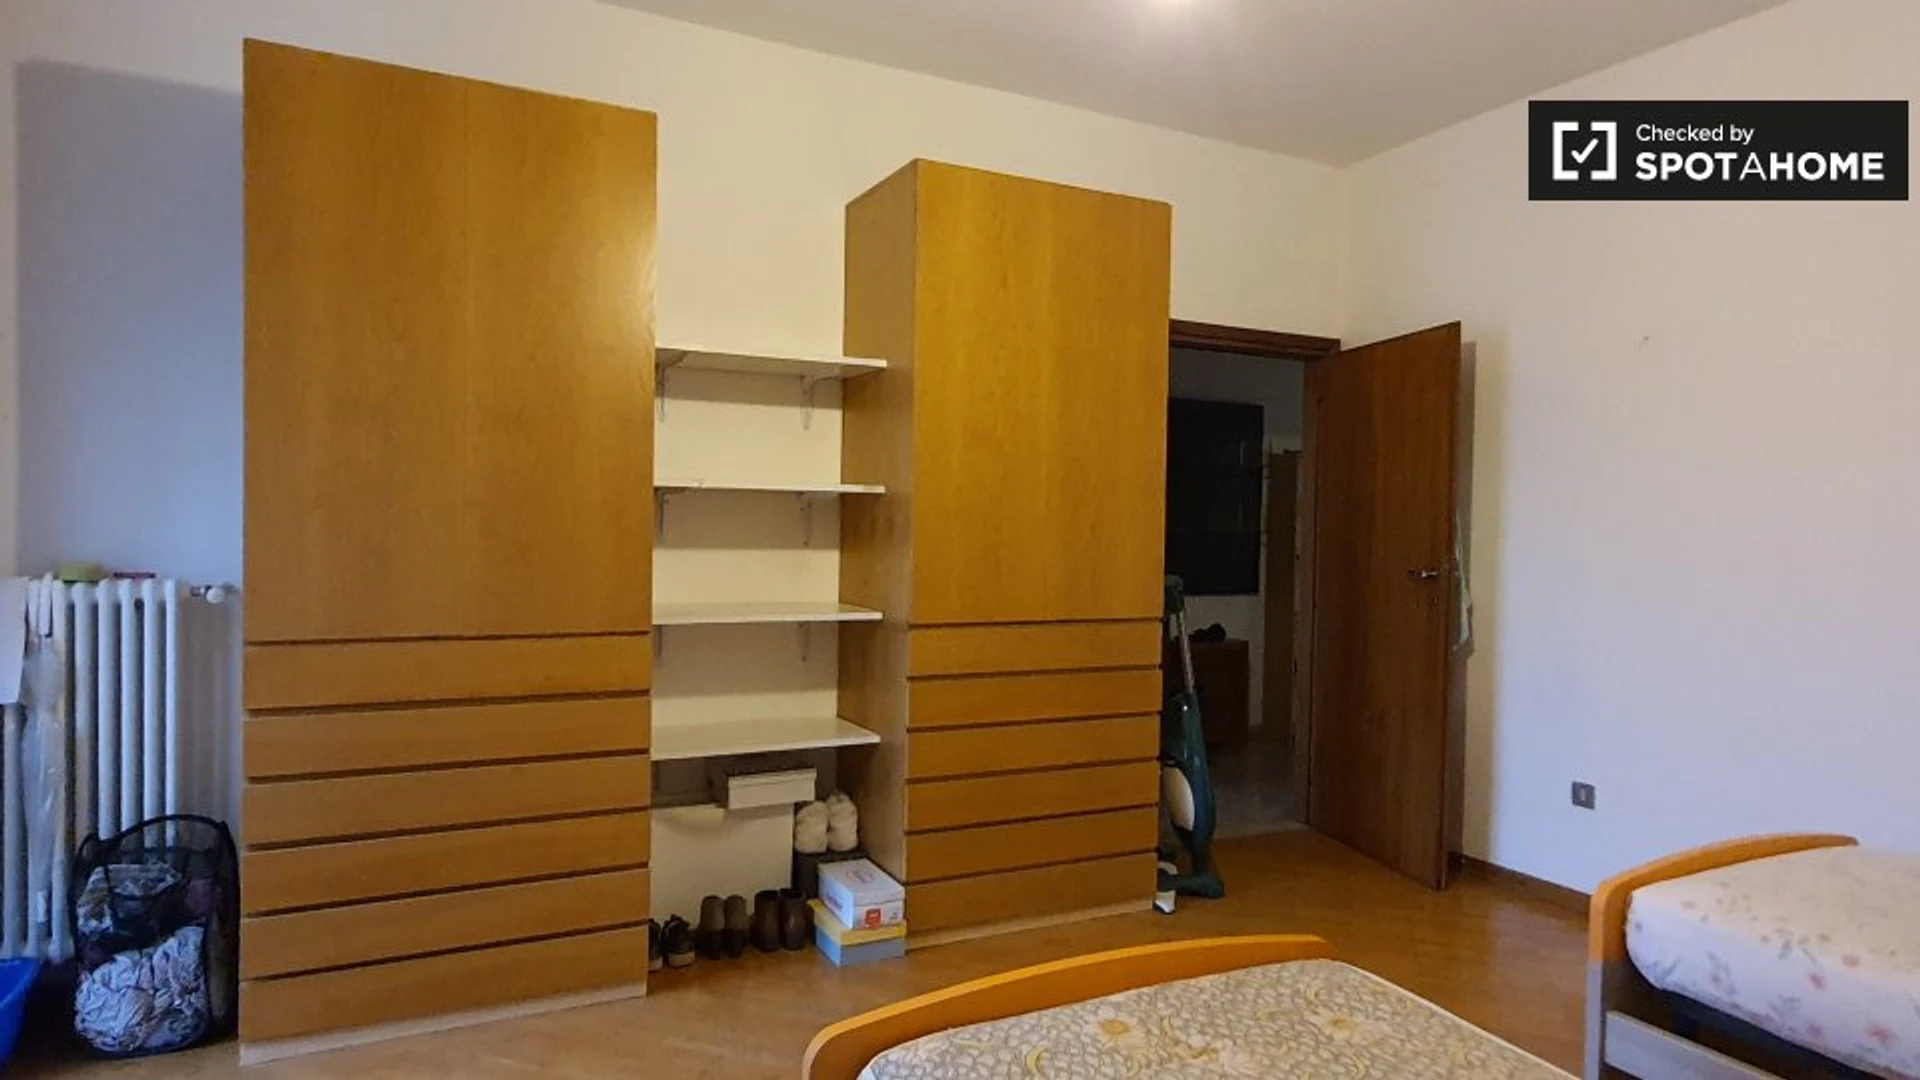 Renting rooms by the month in Trento